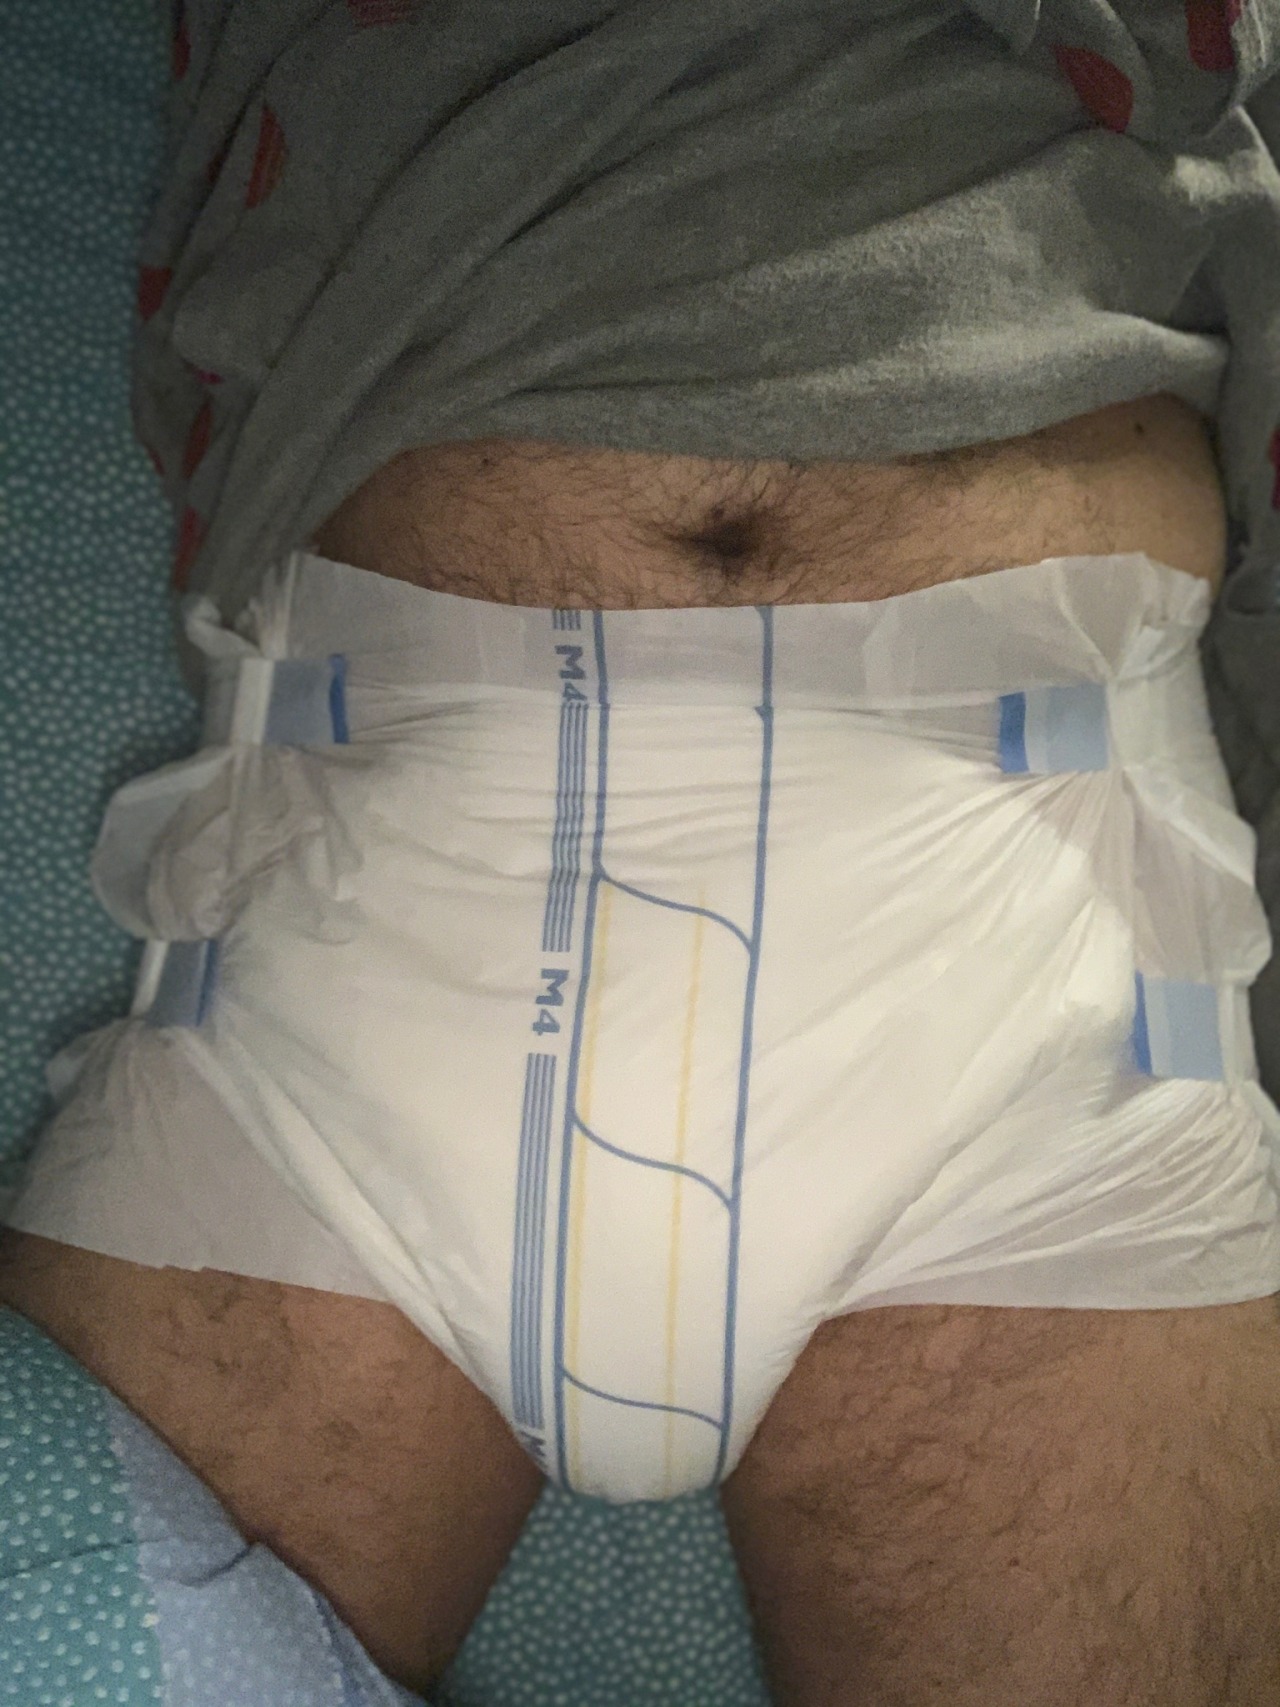 gay porn forced to wear diaper by daddy